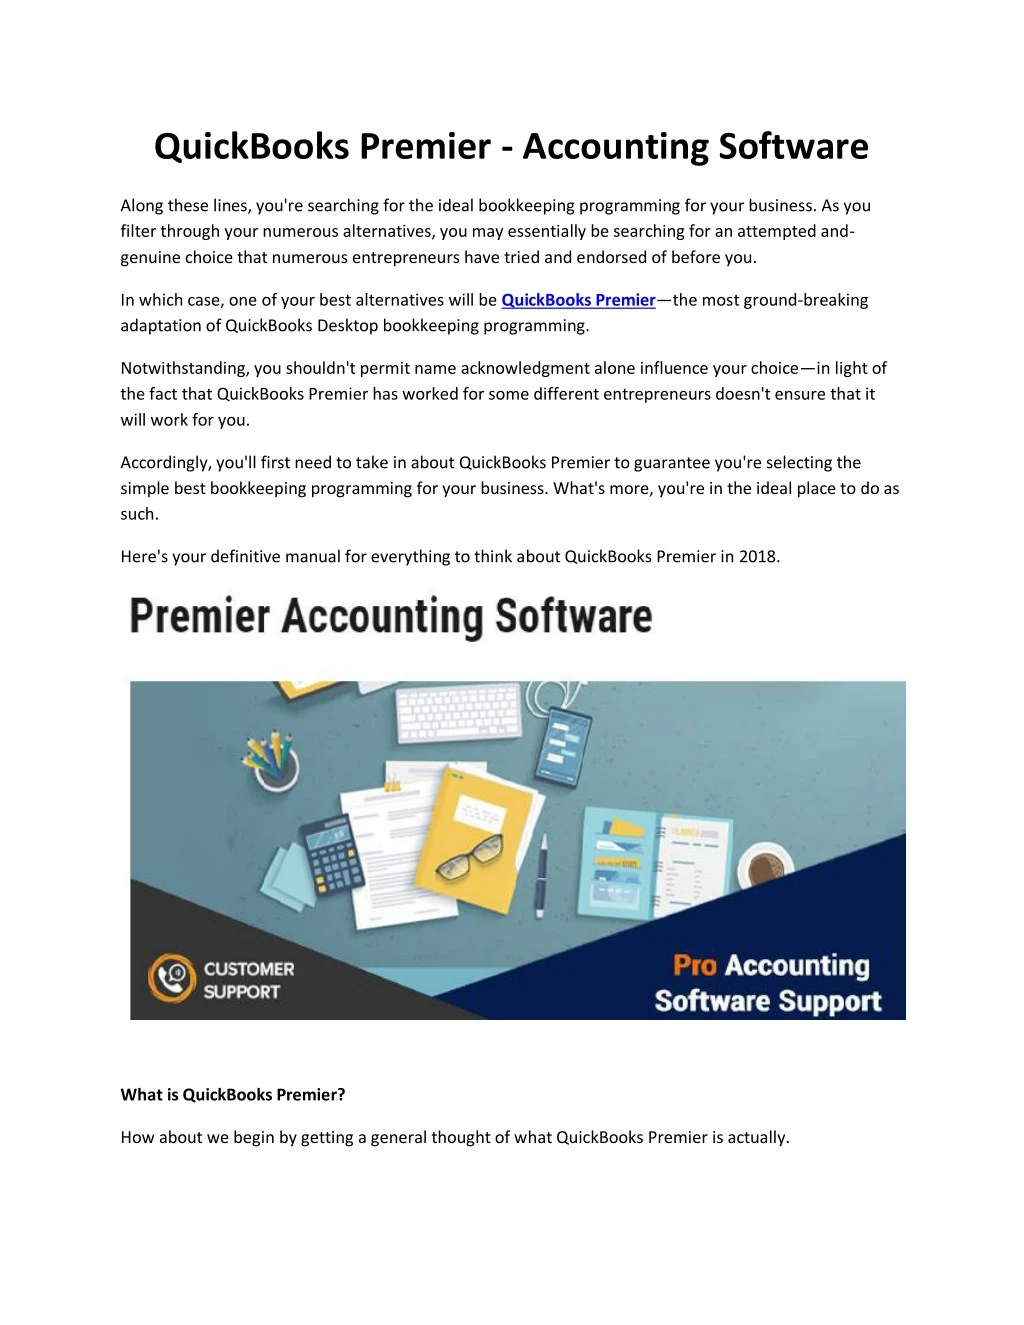 quickbooks premier accounting software